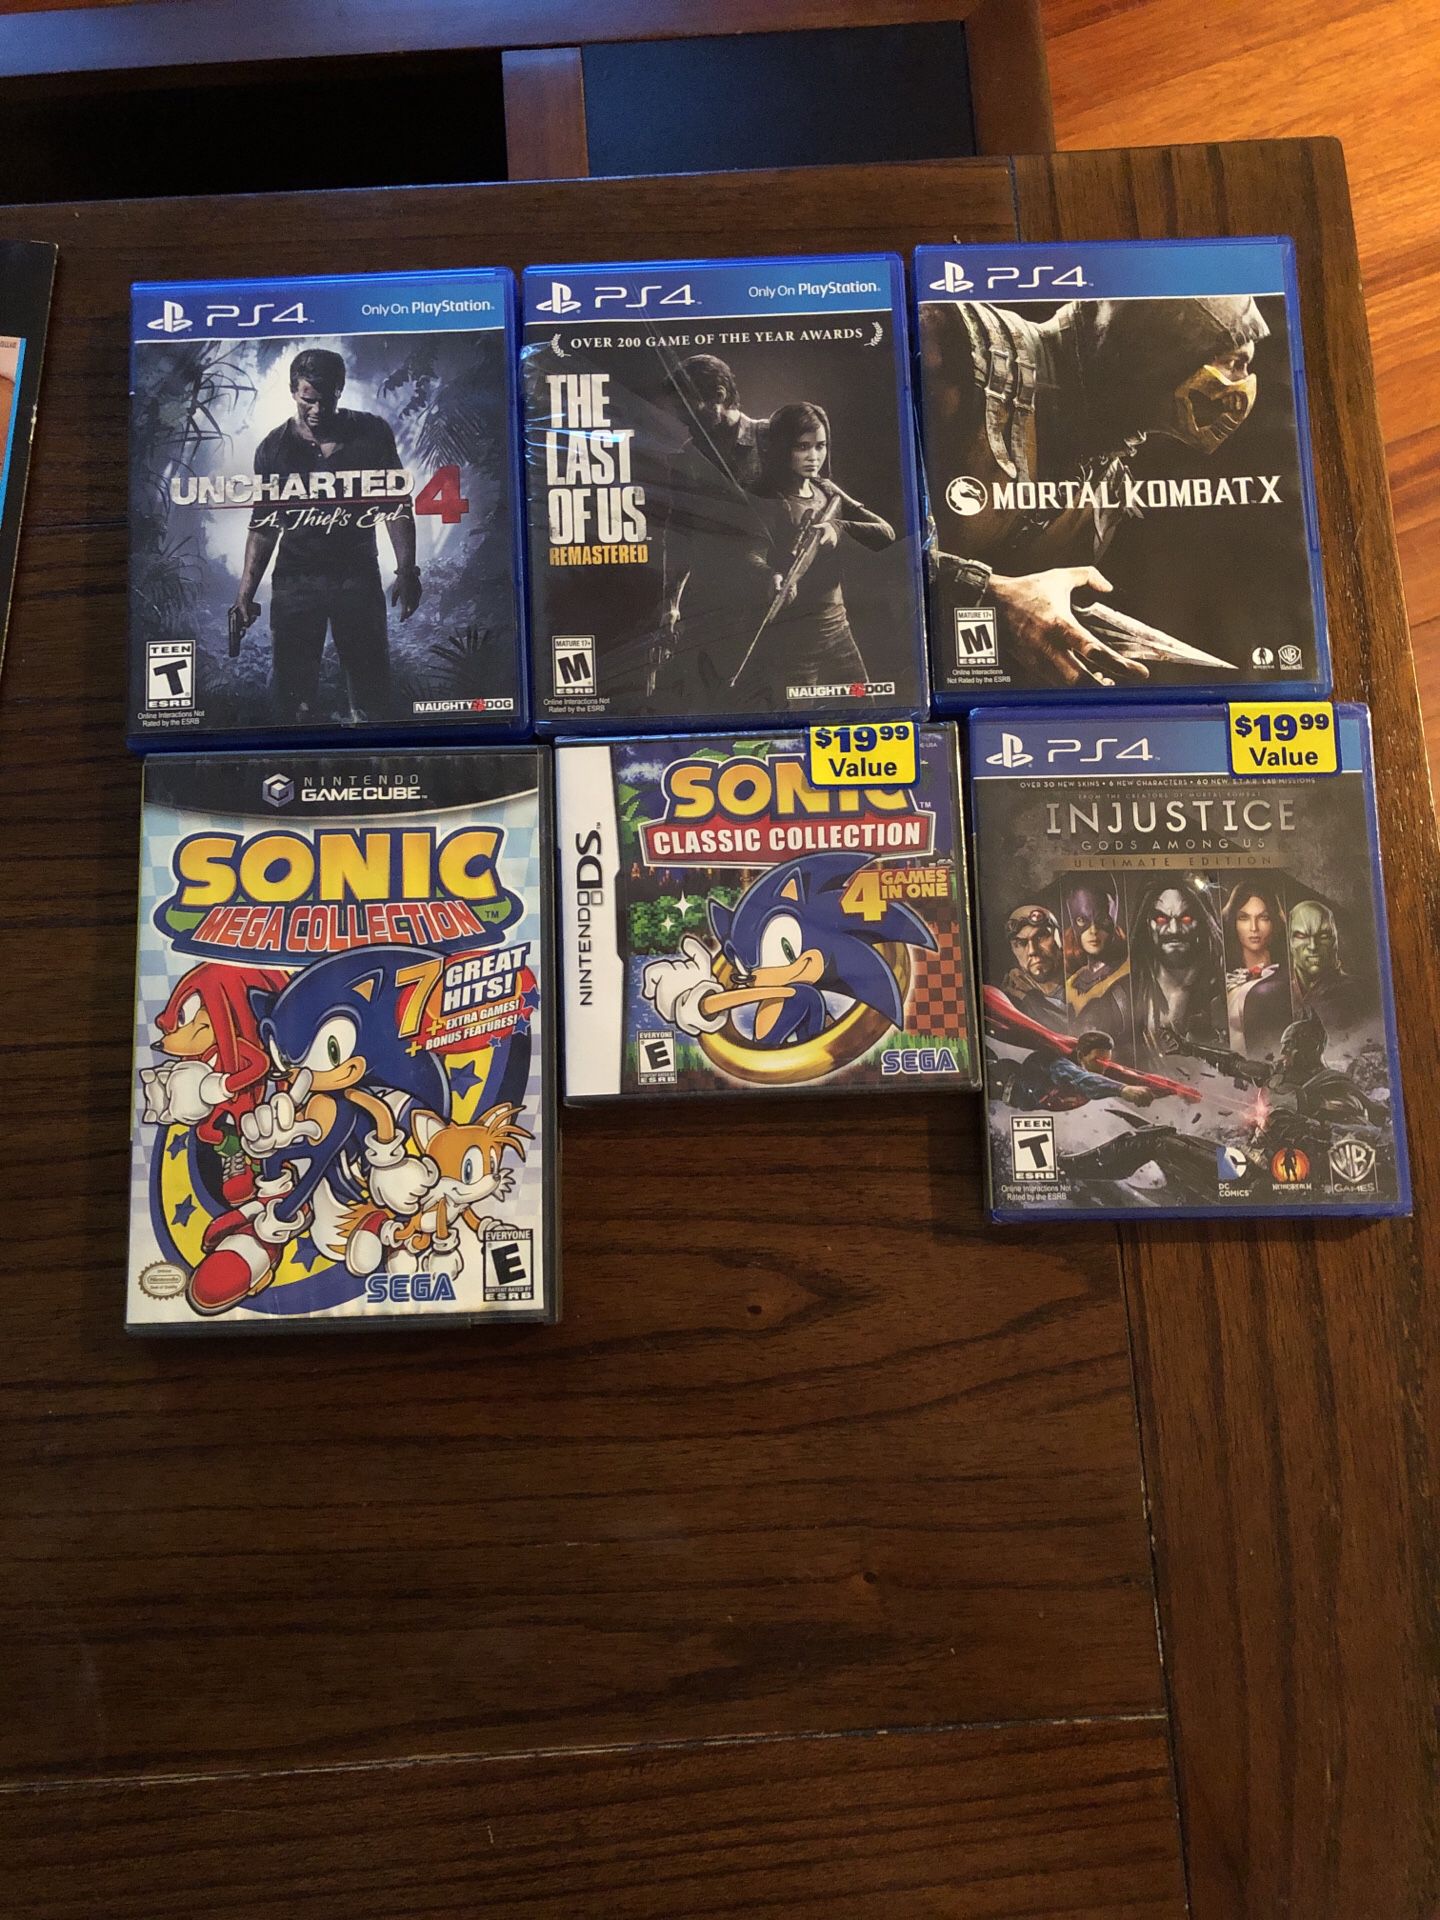 Games For Sale